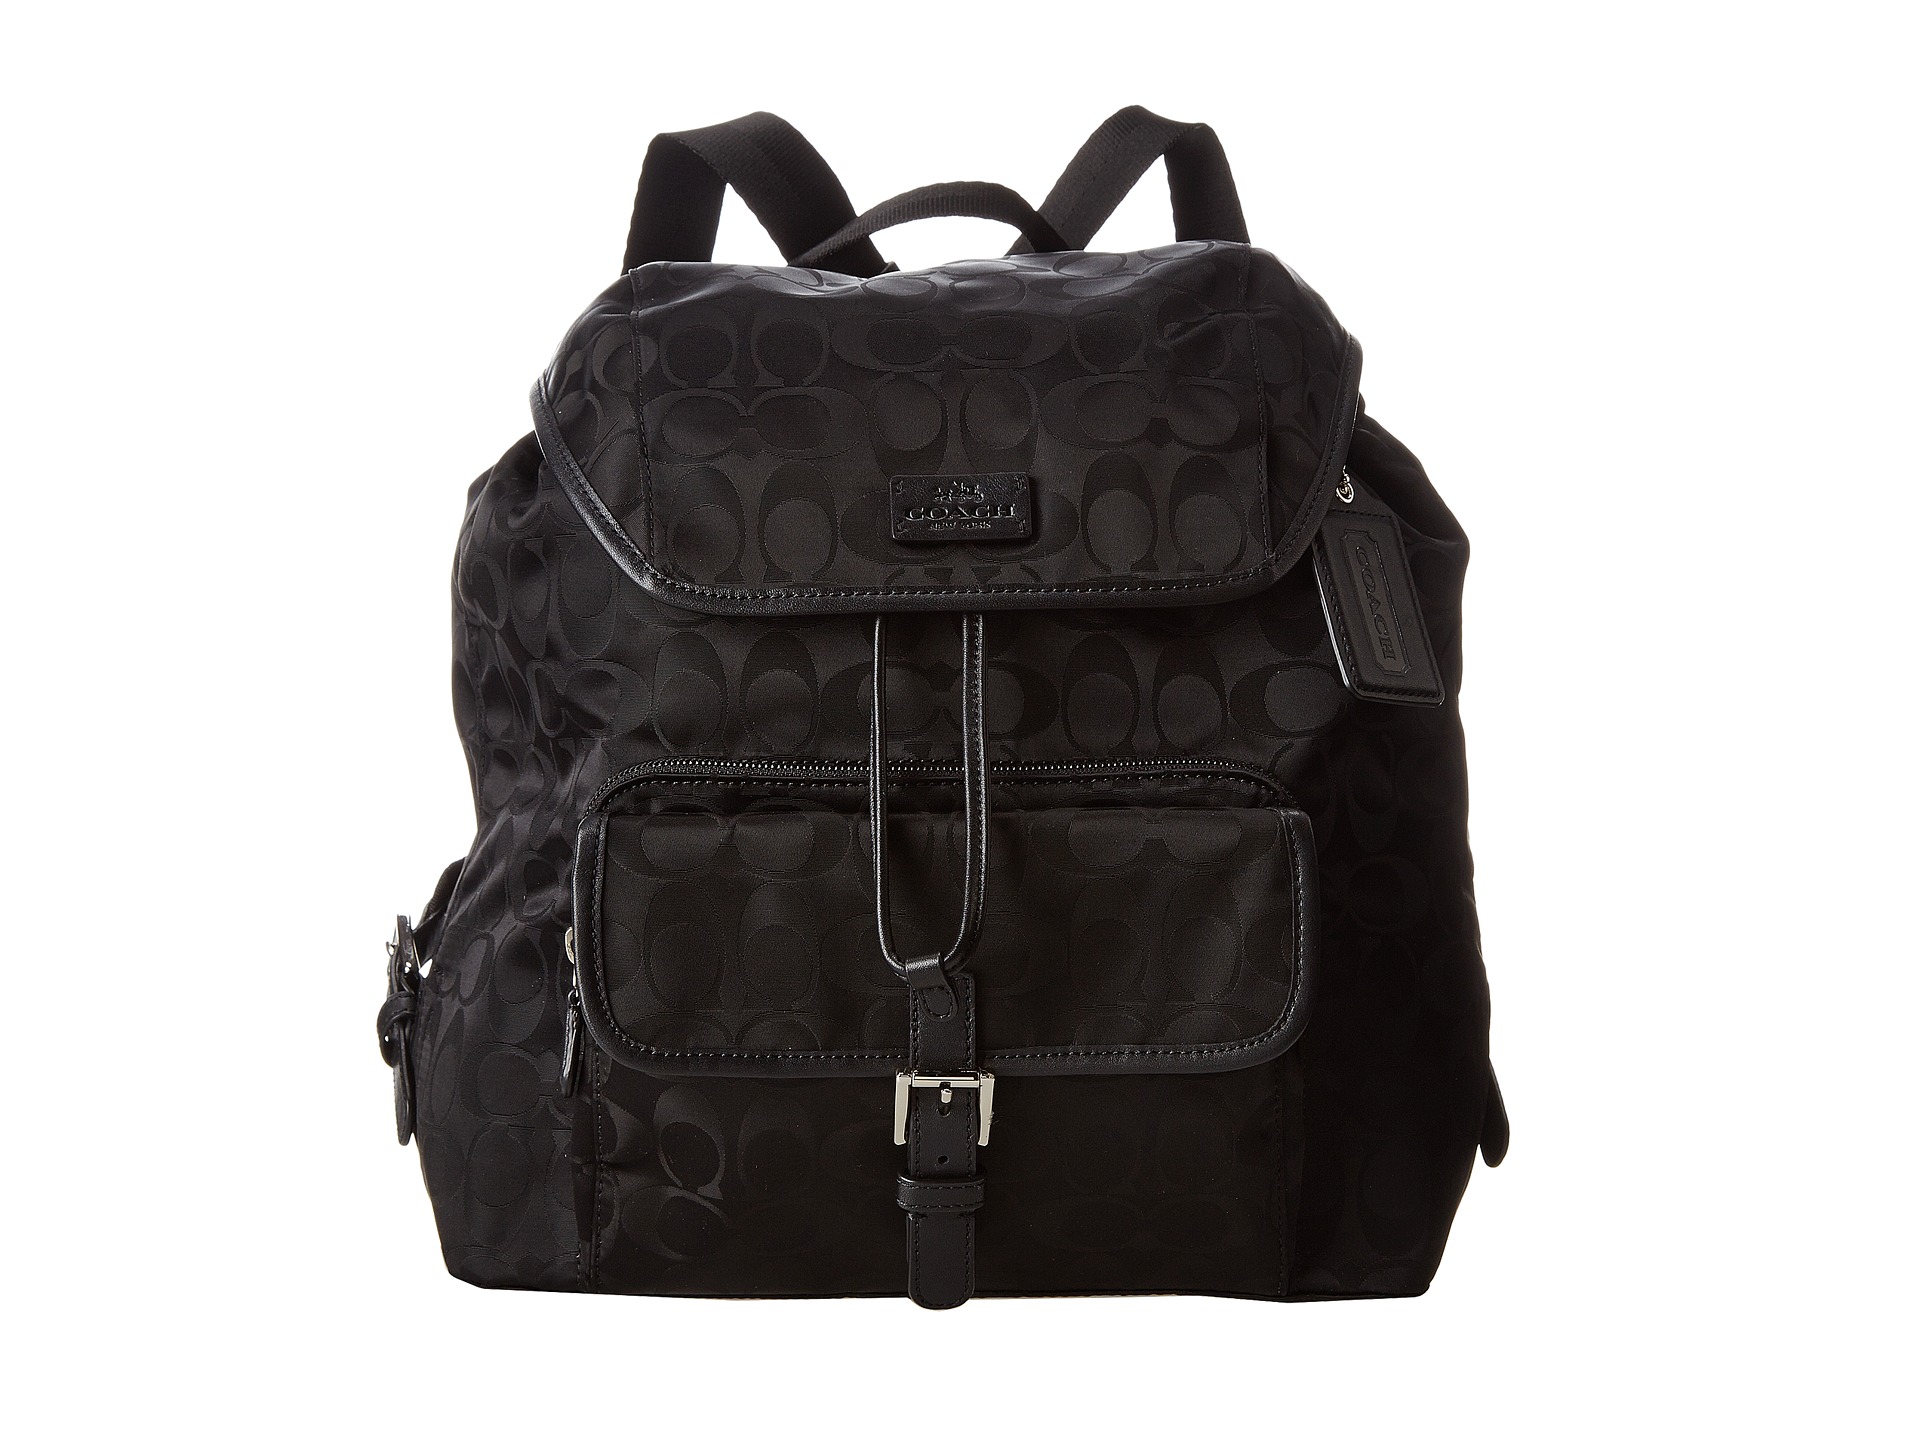 Coach Signature Nylon Backpack, Bags | Shipped Free at Zappos